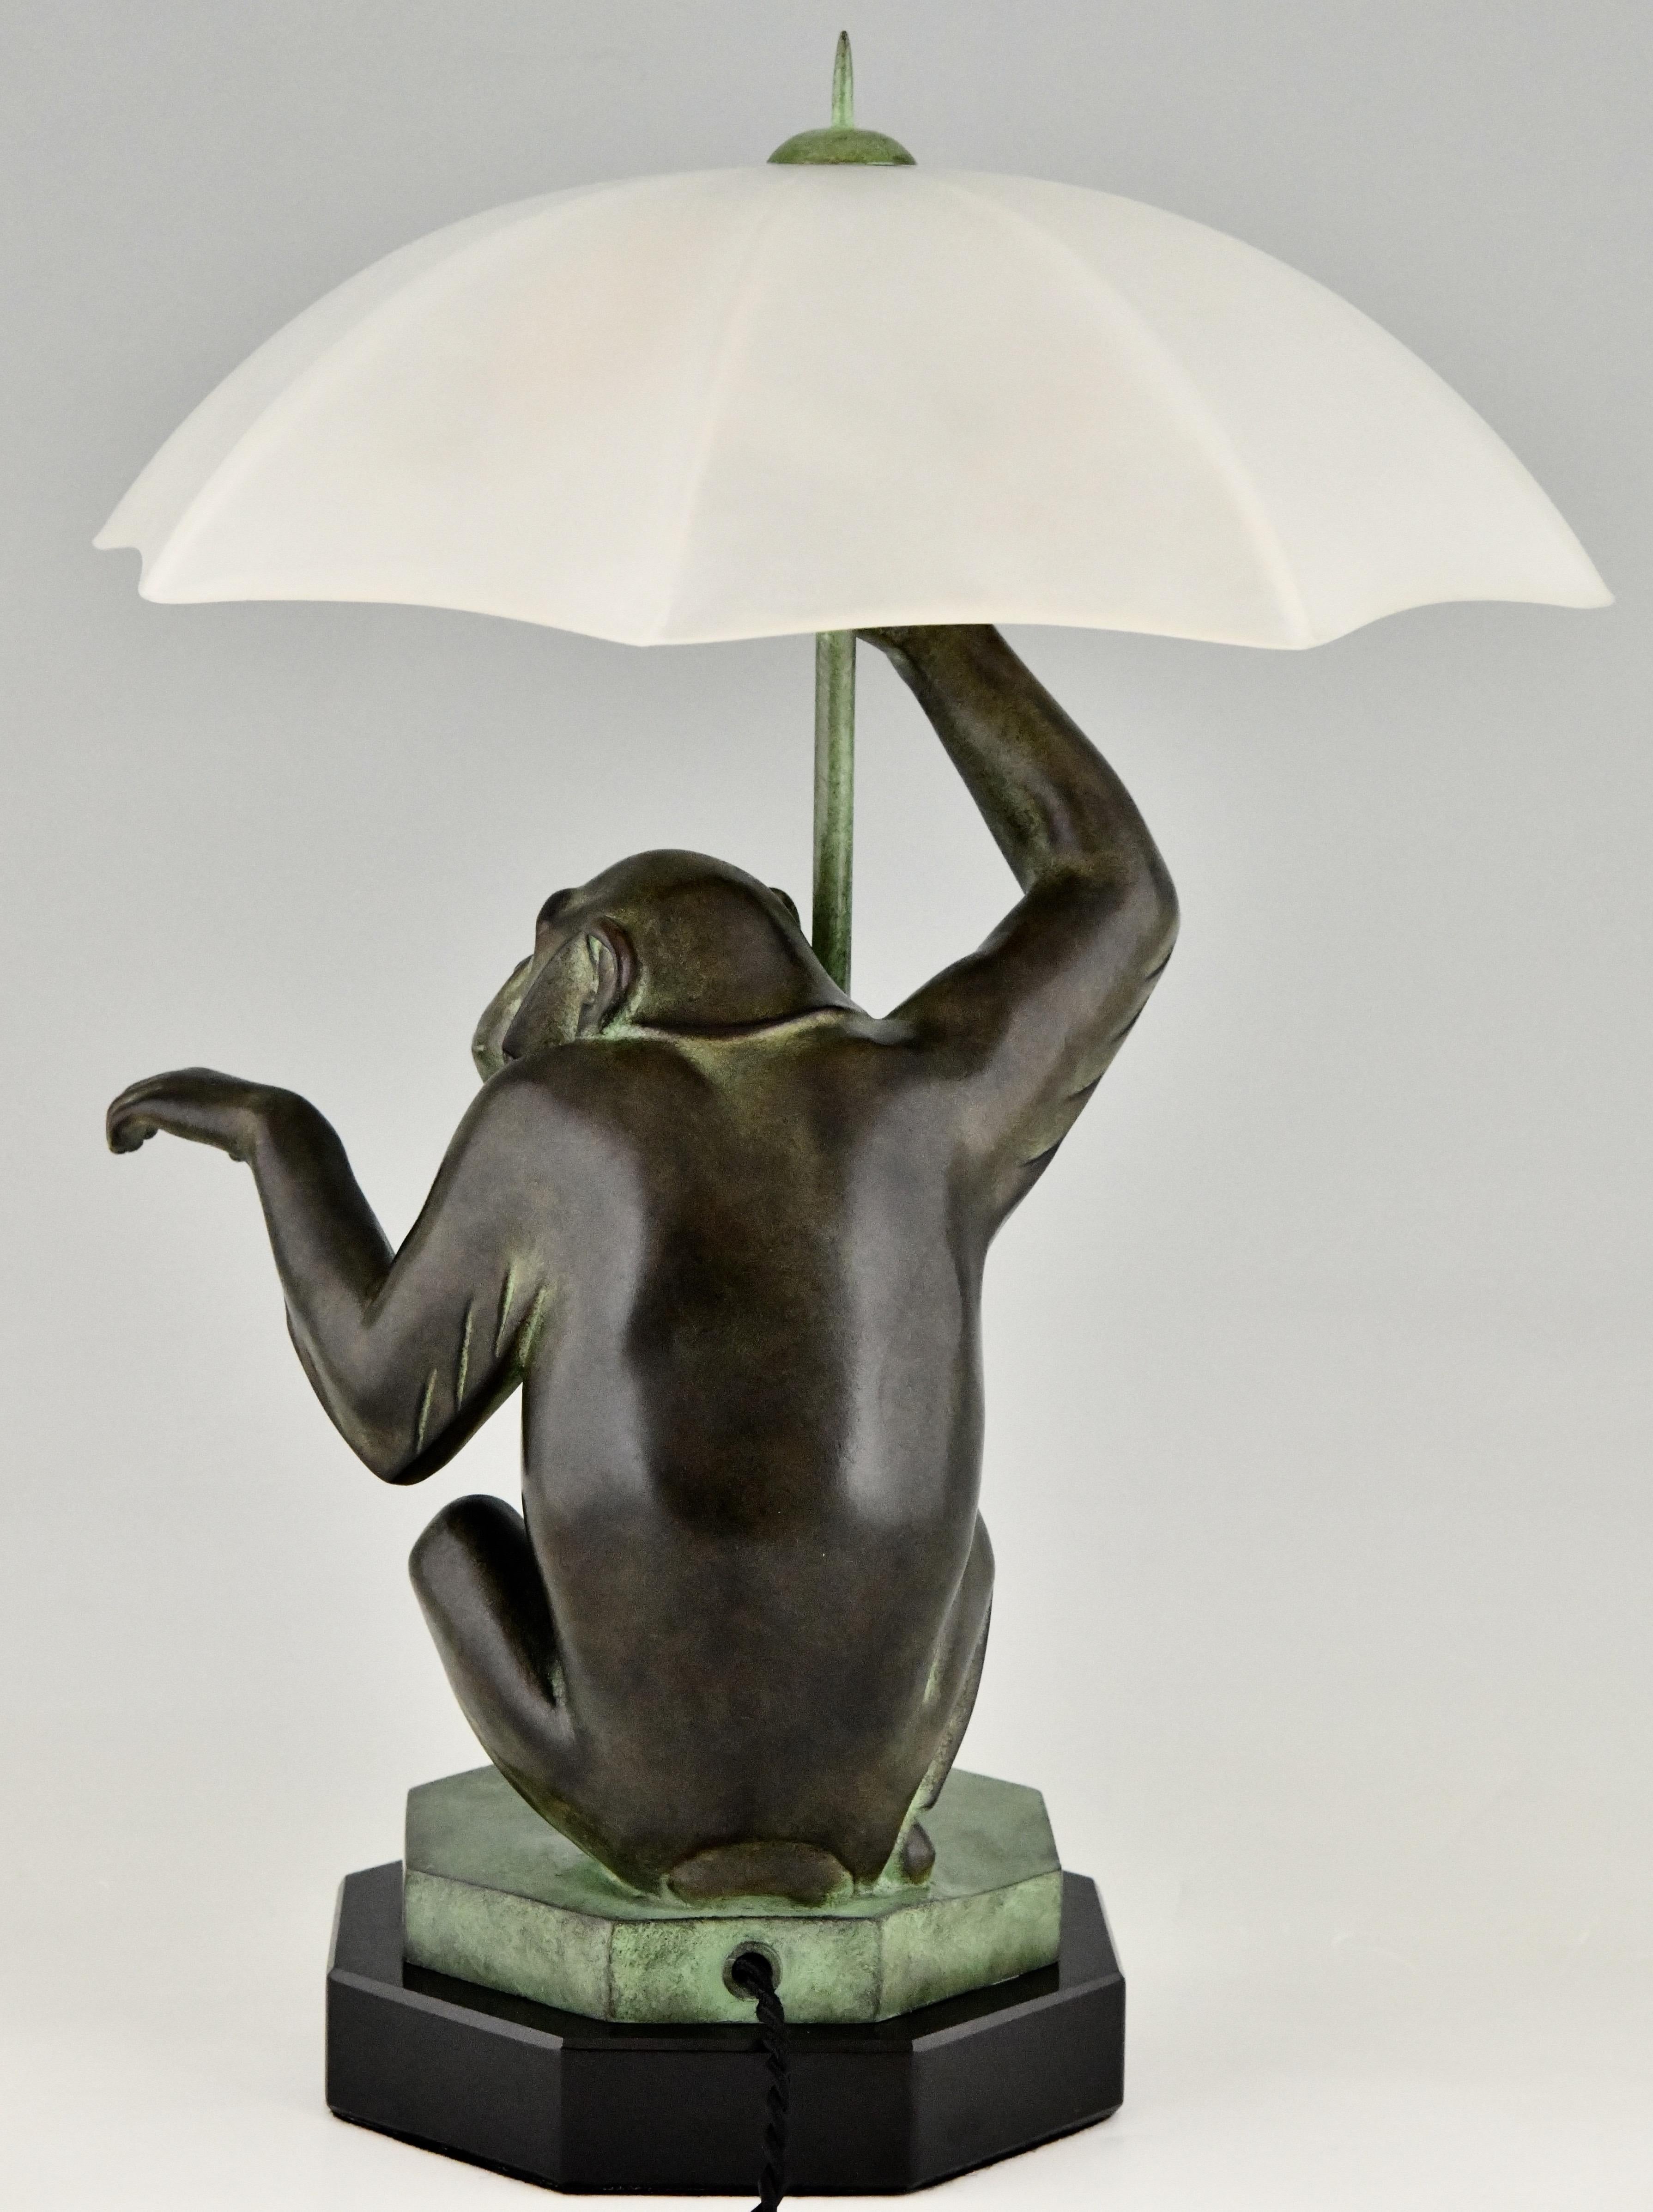 French Art Deco Style Table Lamp Monkey with Umbrella by Max Le Verrier France